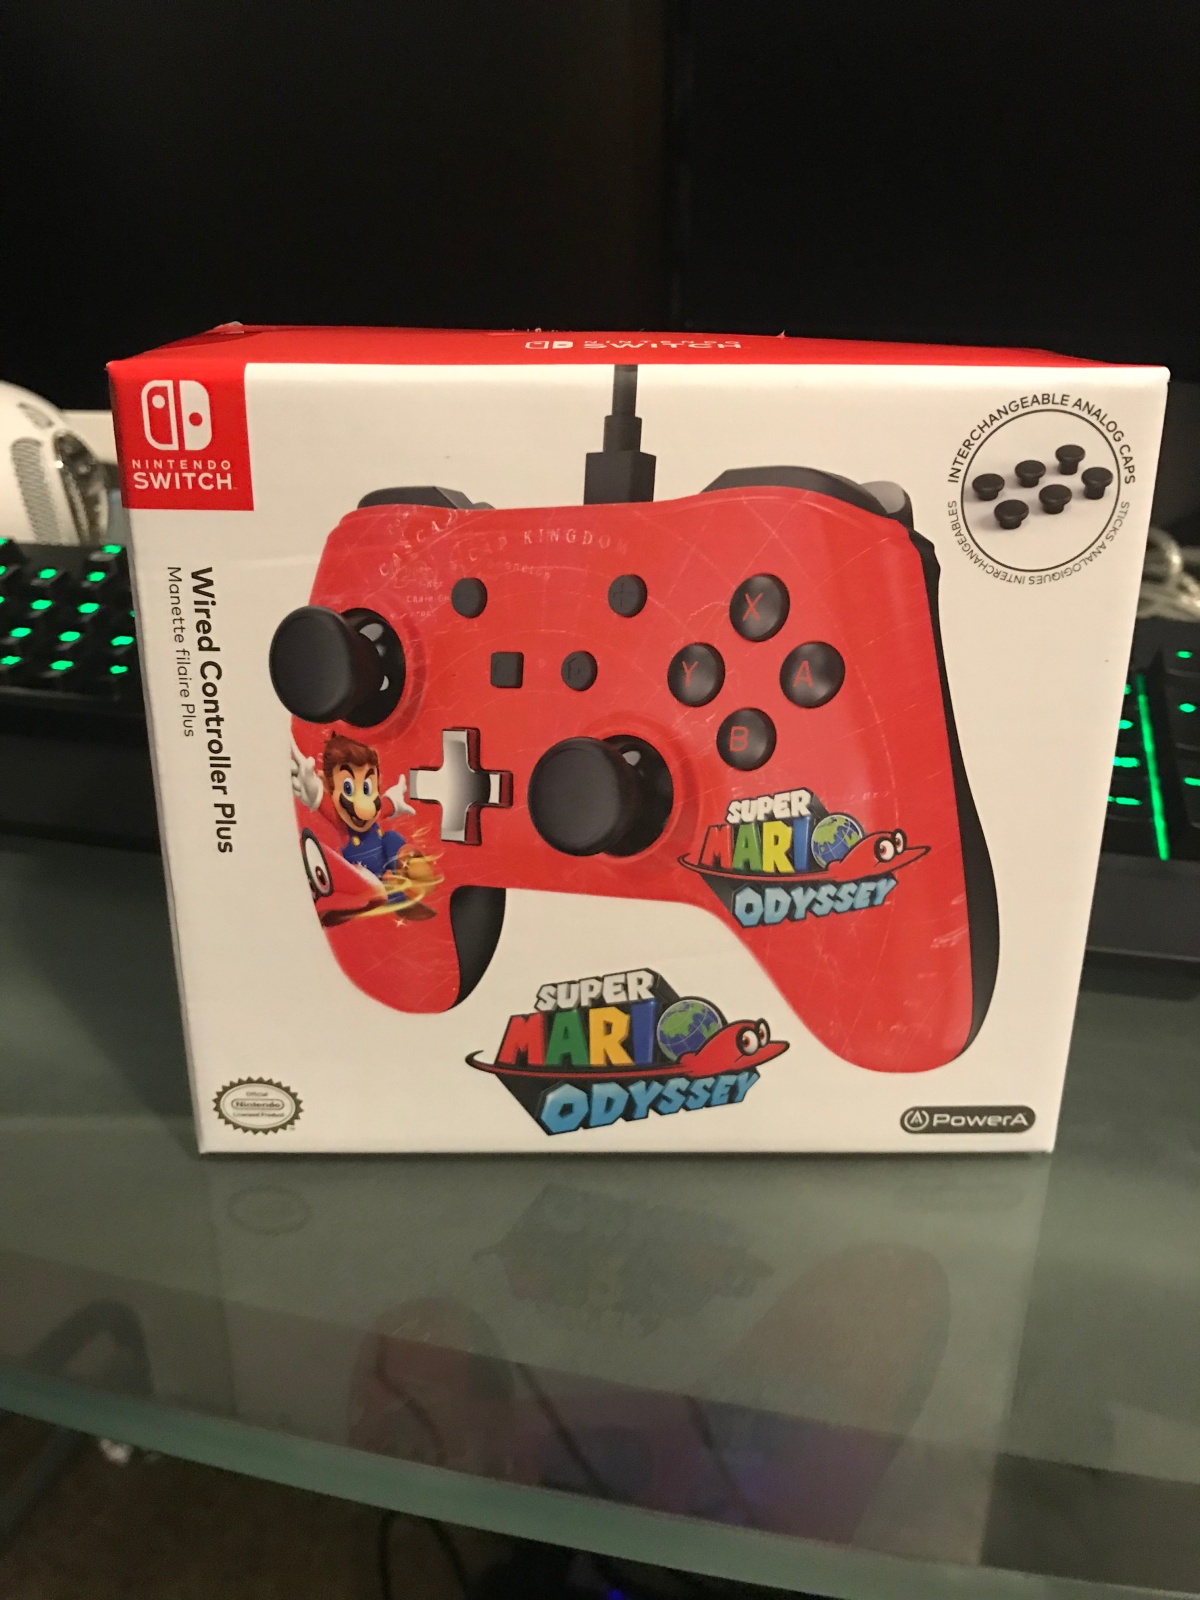 Unboxing The New Super Mario Odyssey Wired Controller Plus for Nintendo Switch